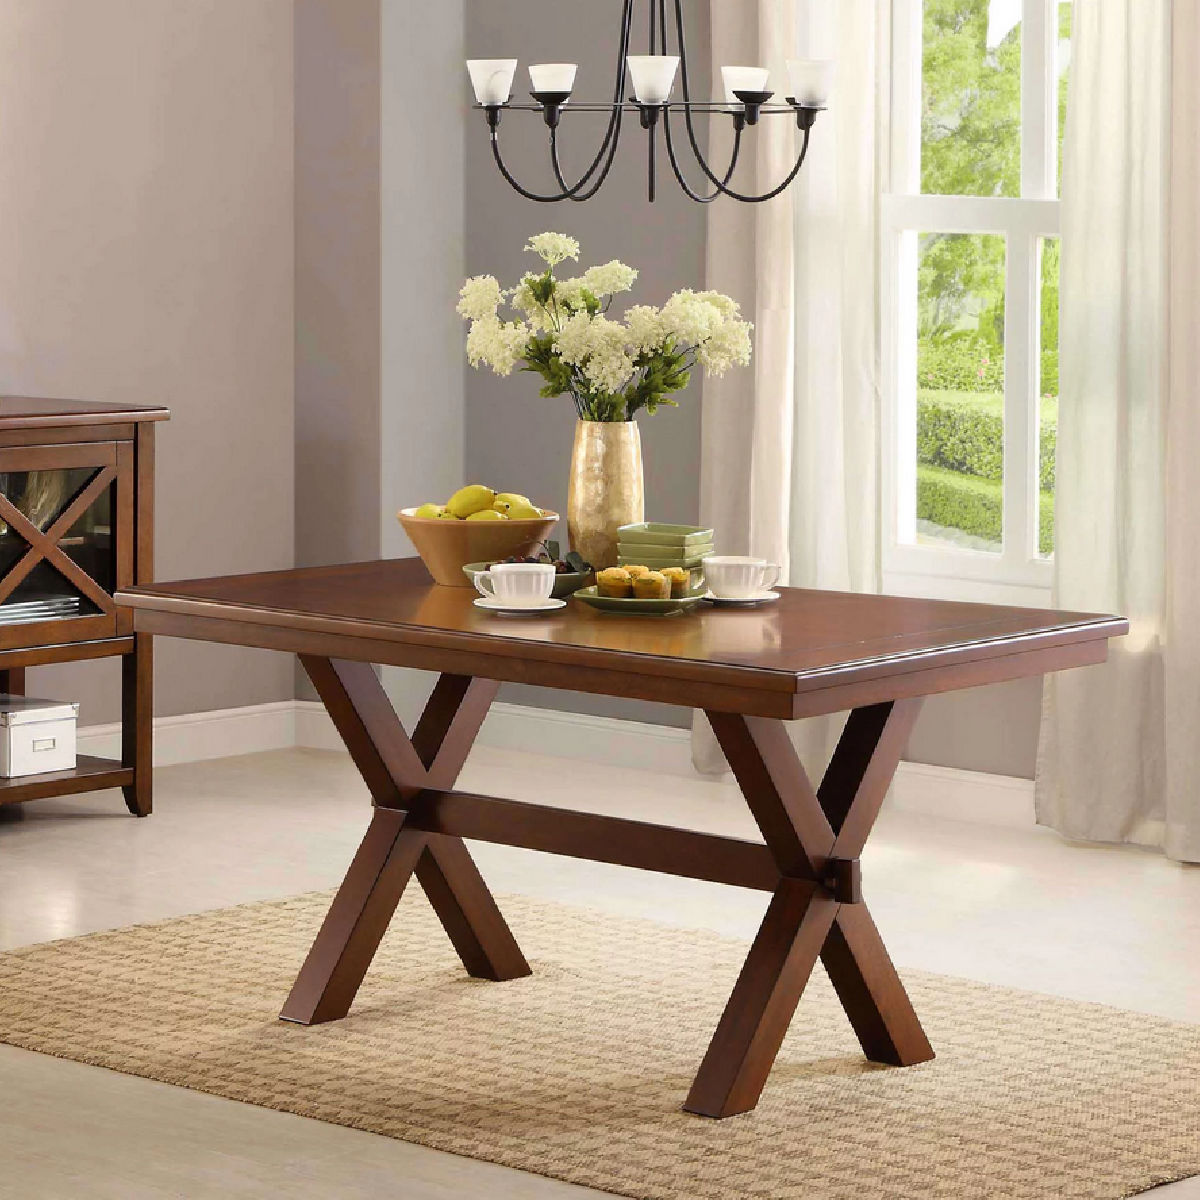 Better Homes & Gardens Maddox Crossing Dining Table